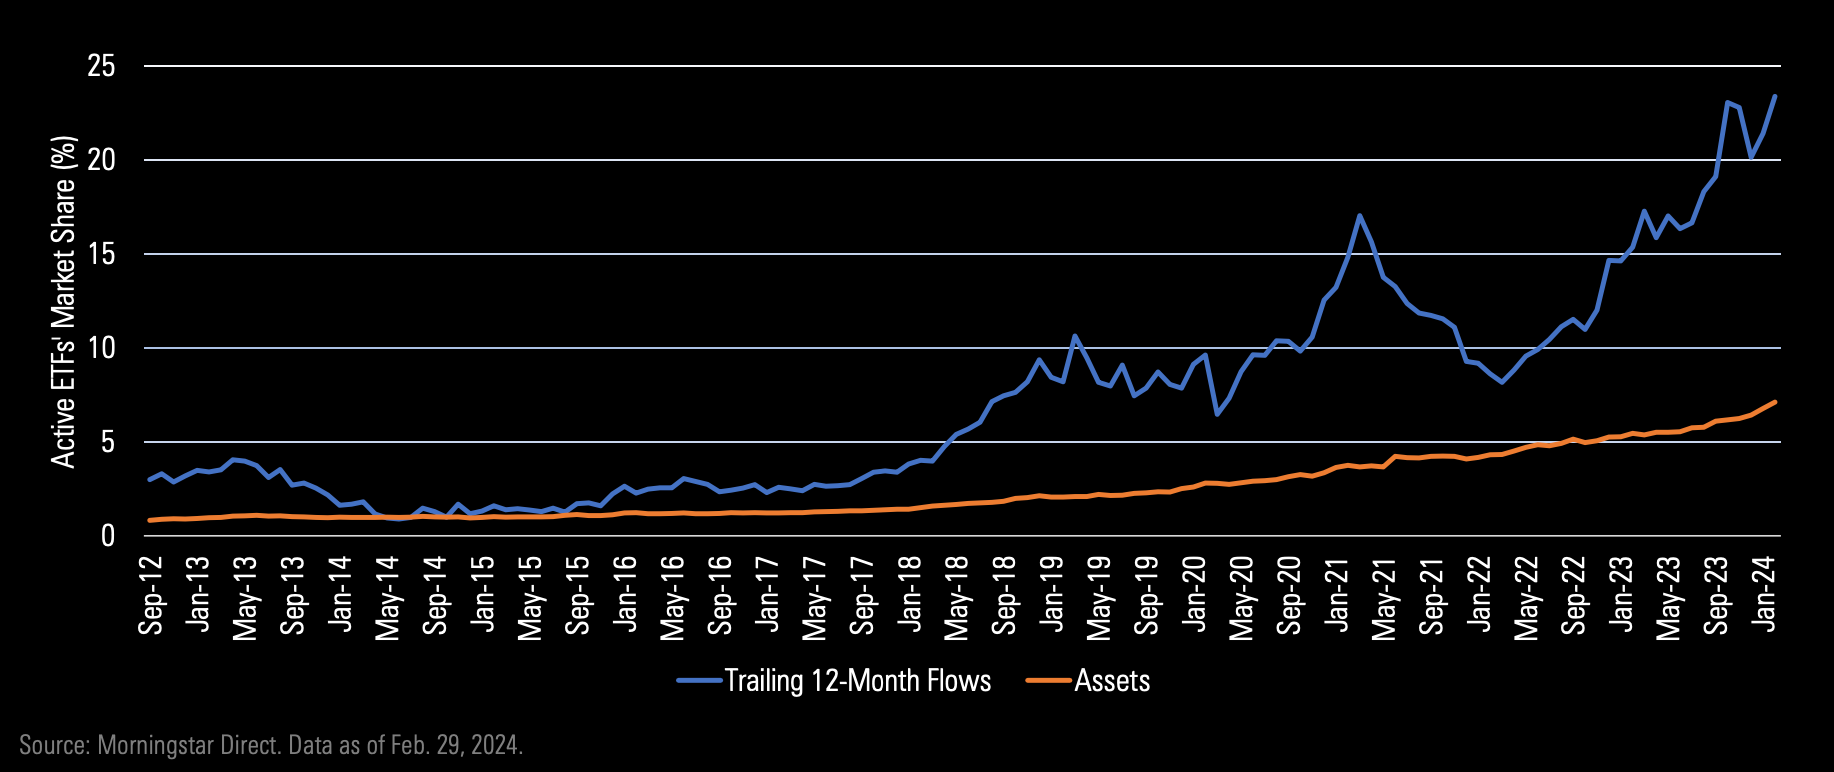 Line graph showing active ETFs assets and trailing 12-month flows from September 2012 to January 2024.